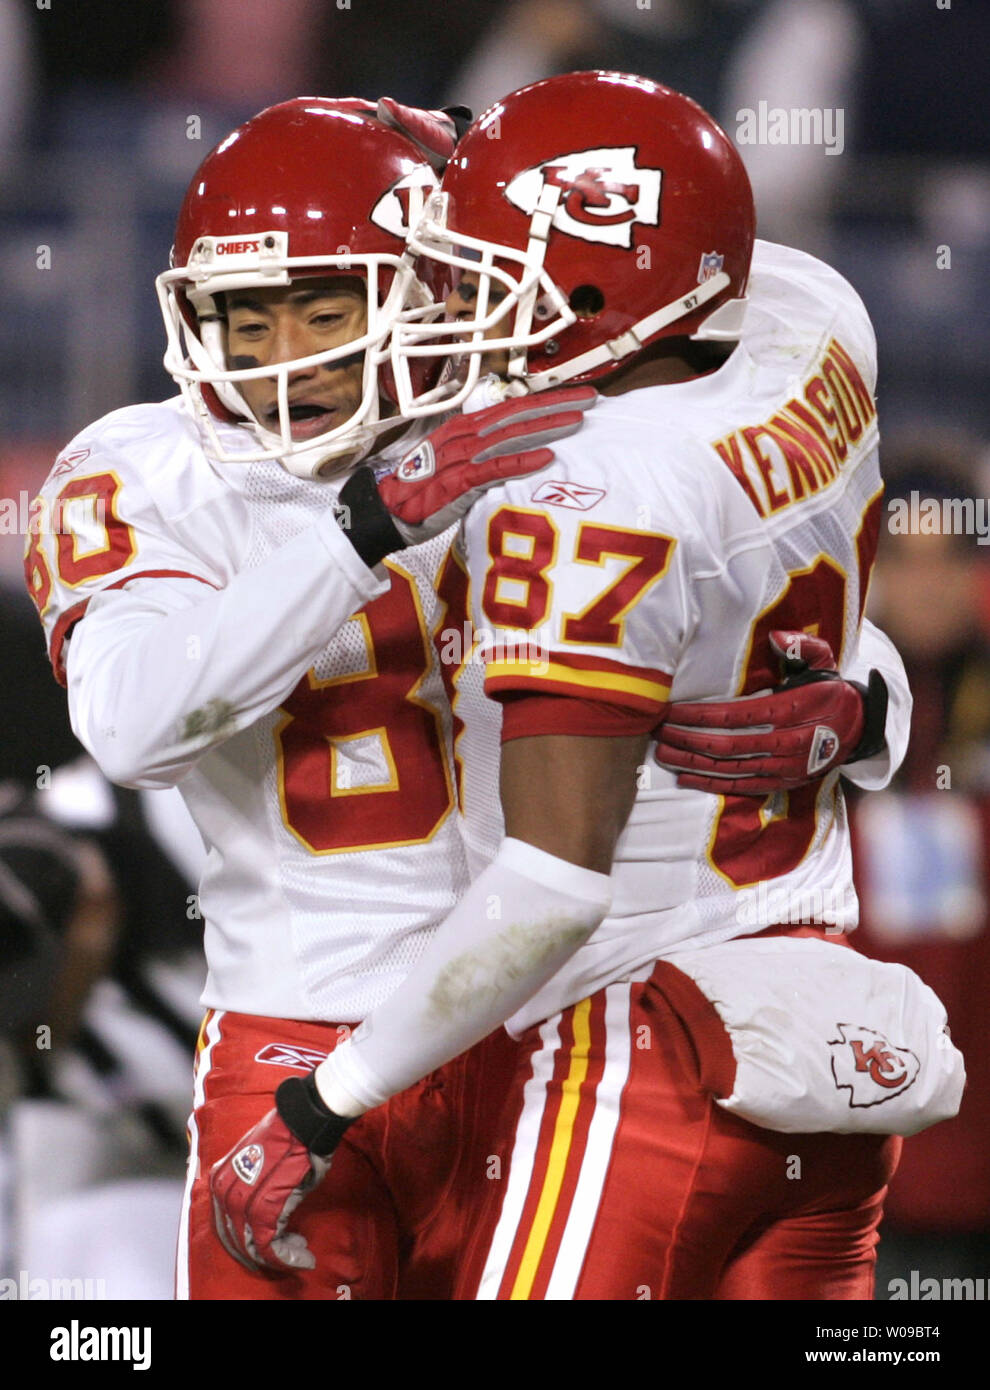 Kansas City Chiefs wide receiver Johnny Morton (80) celebrates a touchdown  in the fourth quarter with teammate wide receiver Eddie Kennison (87)  during NFL Monday Night Football on Dec. 13, 2004 at